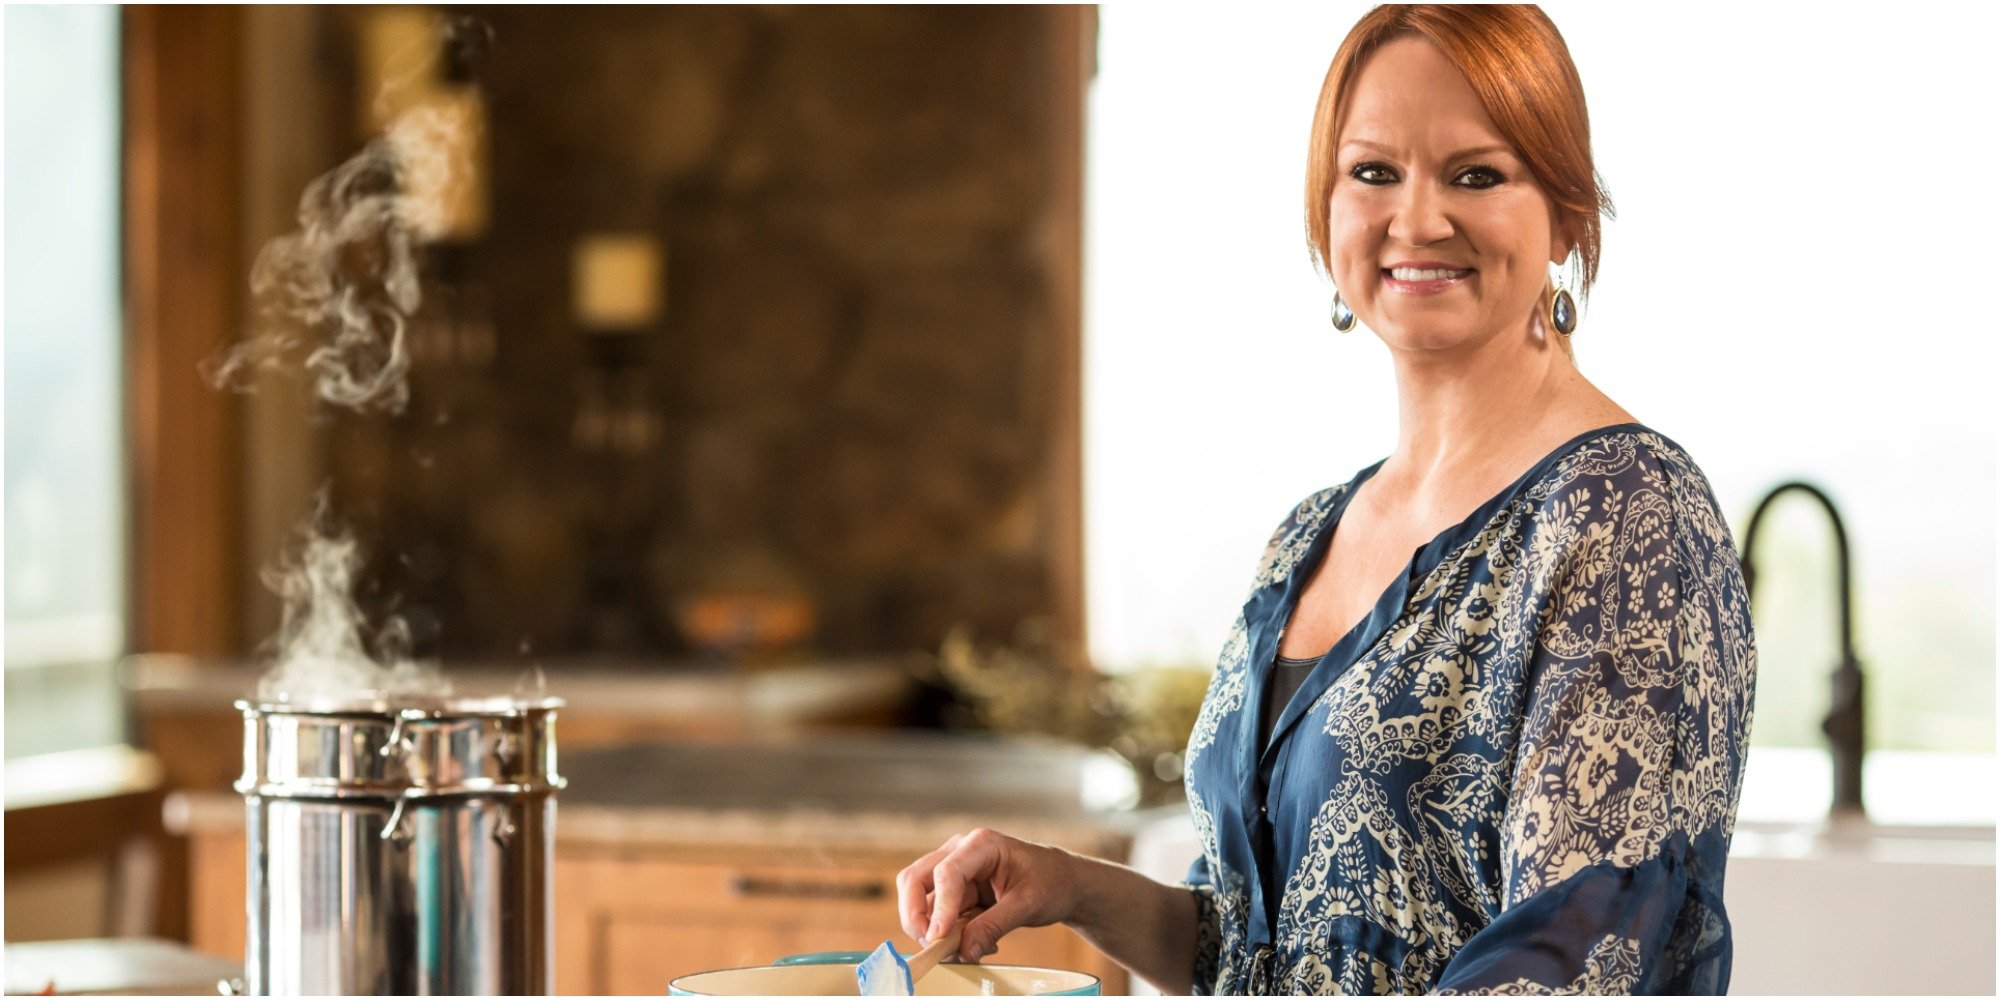 ‘The Pioneer Woman’: Ree Drummond’s Pasta Alla Vodka Is Wildly Good: ‘Lord Have Mercy’